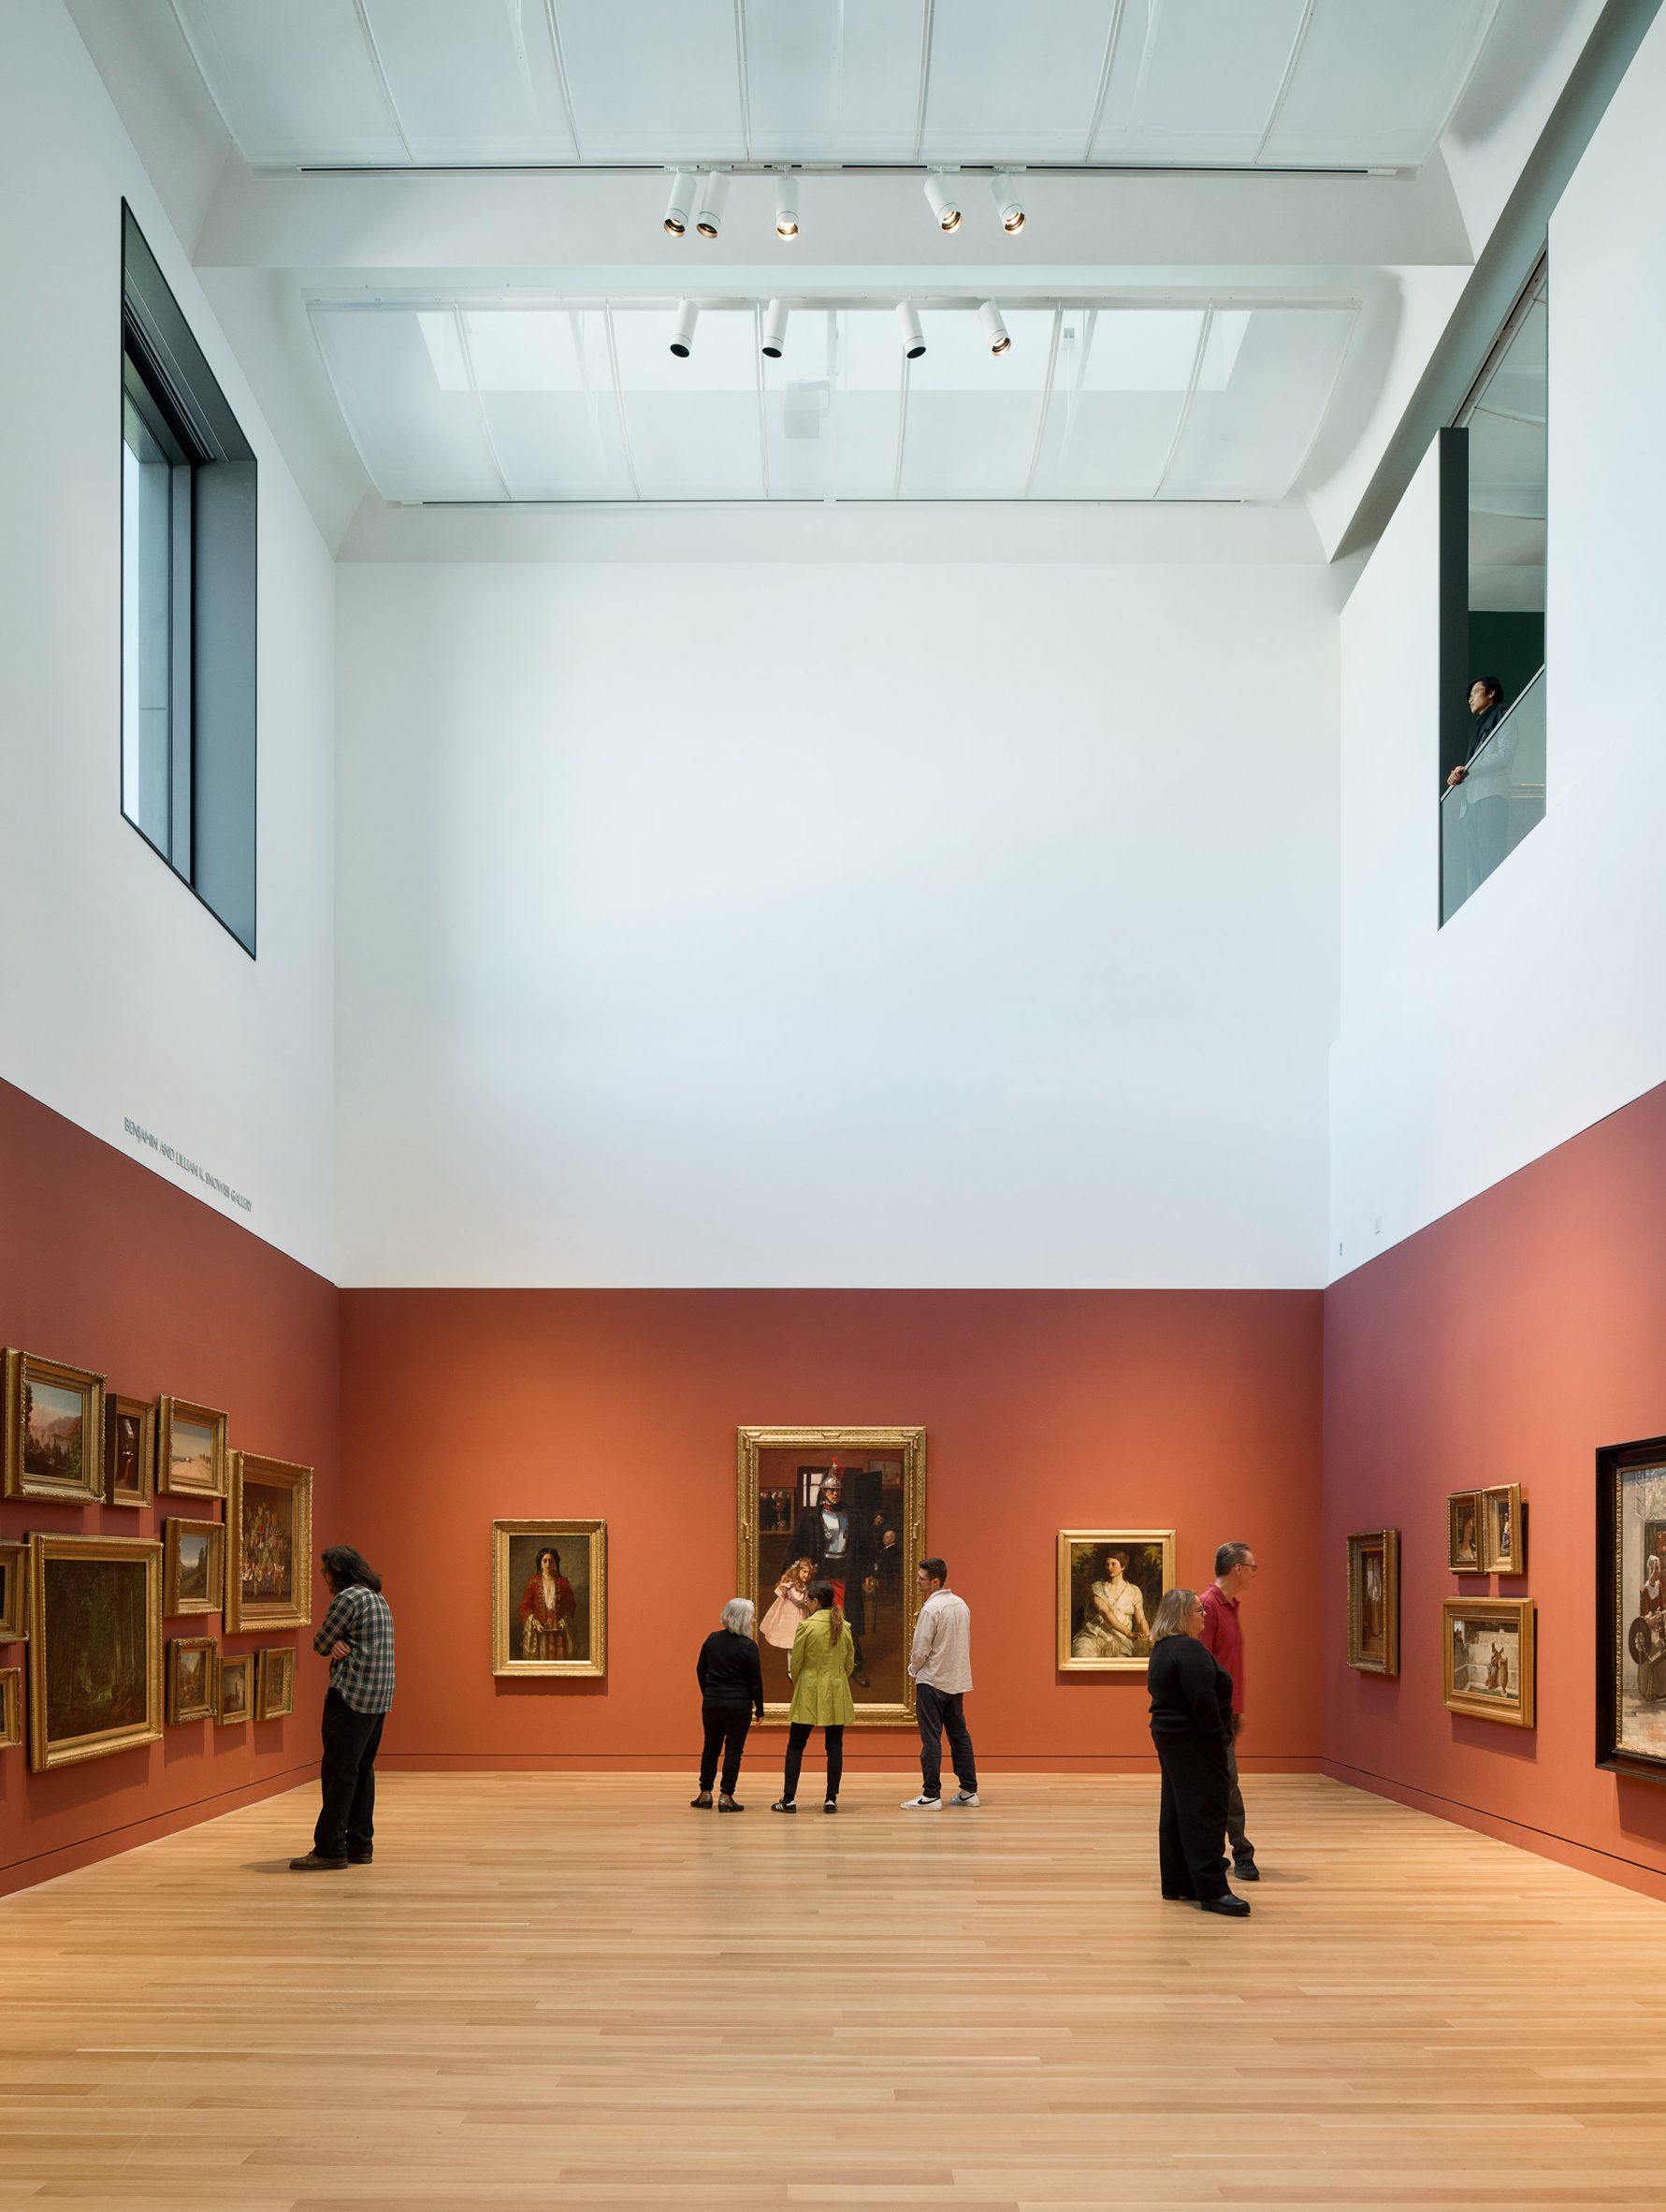 Double-height gallery in museum